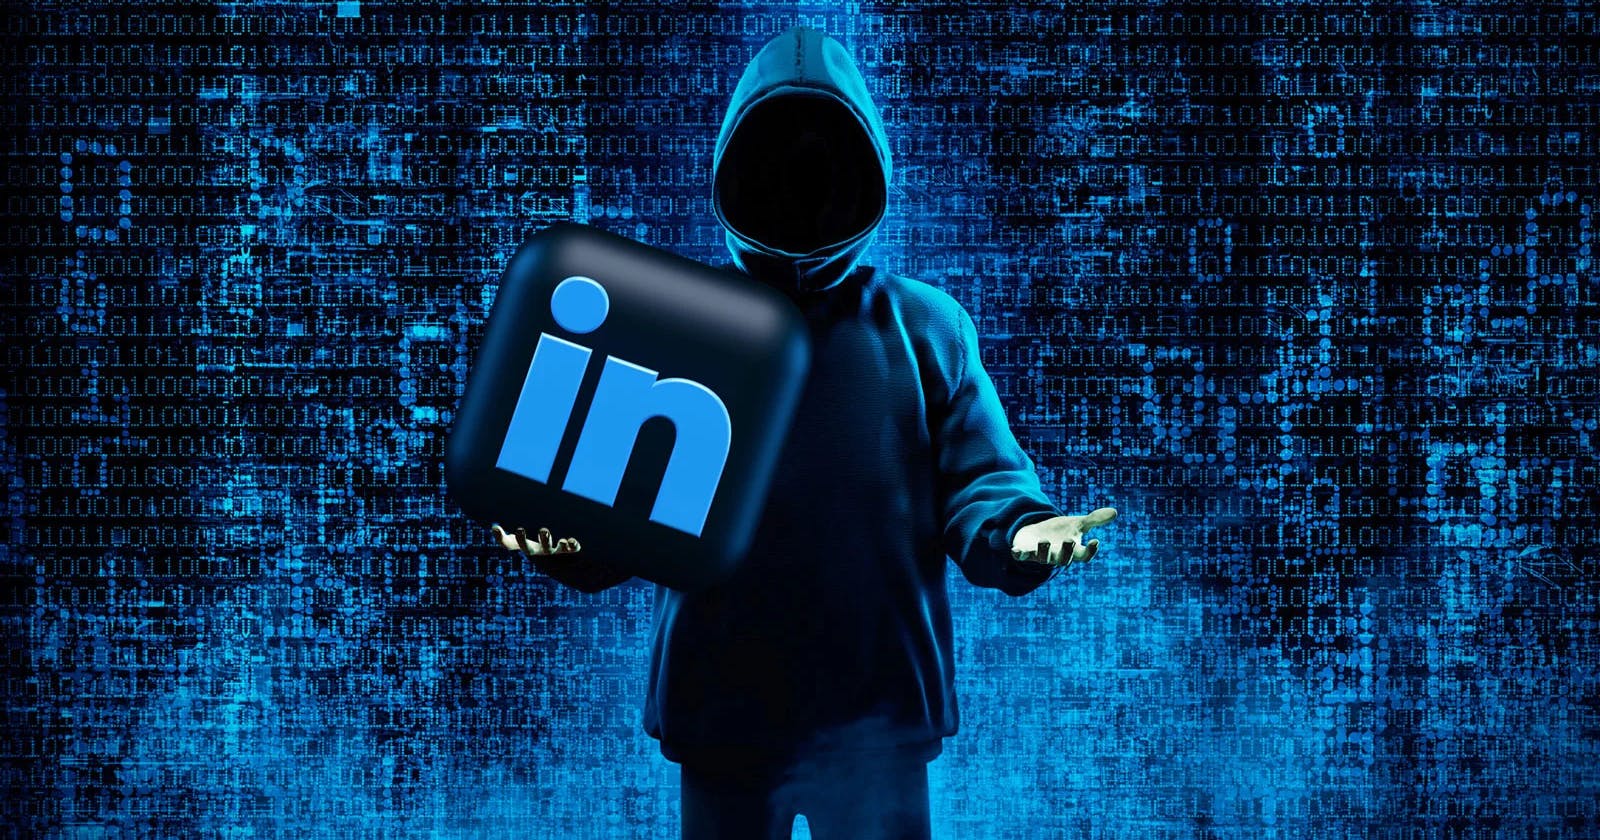 LinkedIn accounts hacked in widespread hijacking campaign